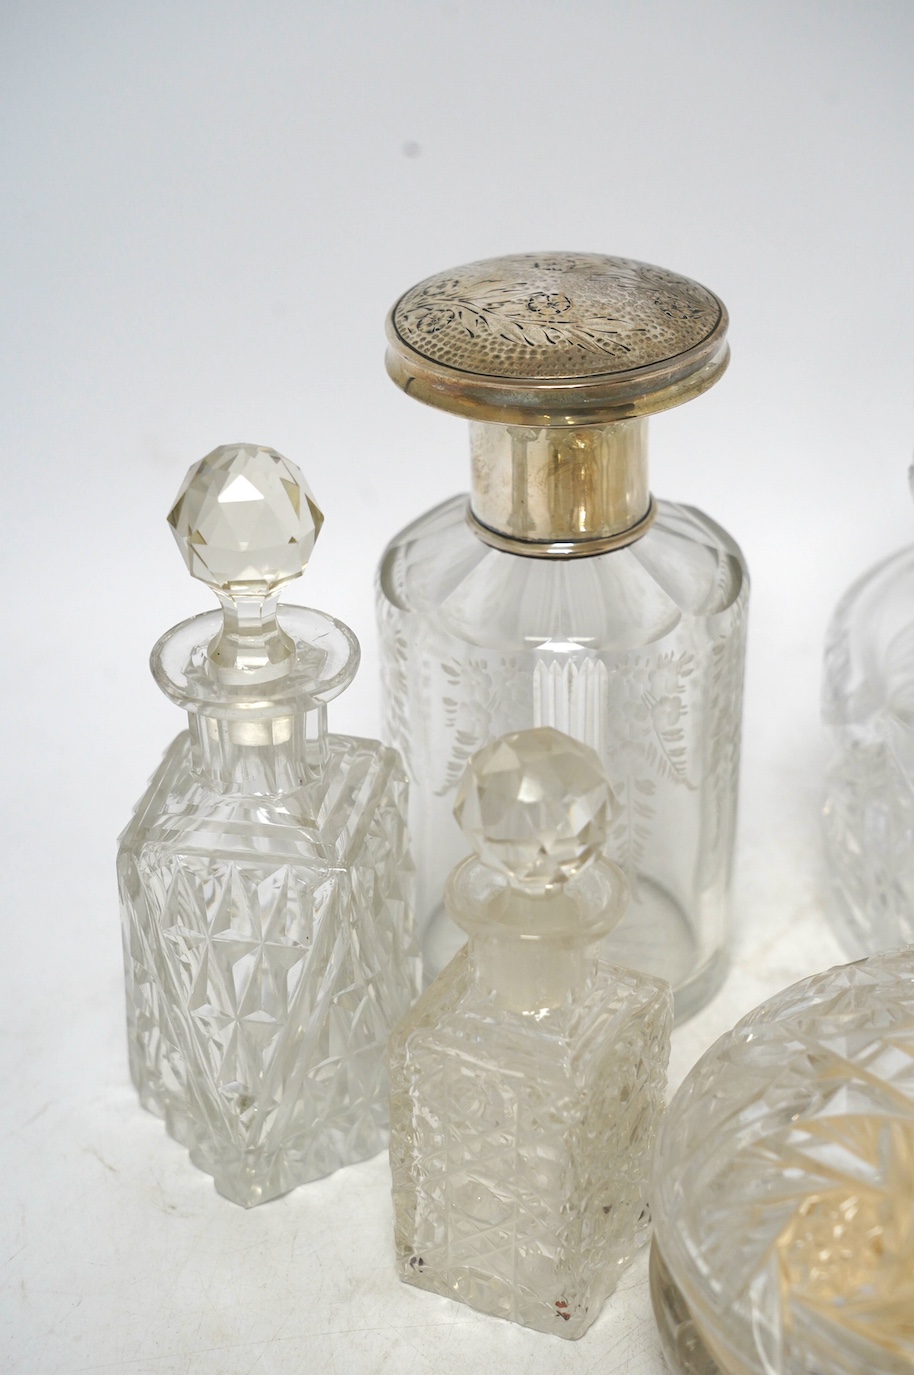 Six cut glass dressing table bottles and bowls, including a bottle with an 800 standard, large white metal cover, 800 standard bottle 16cm high. Condition - fair to good